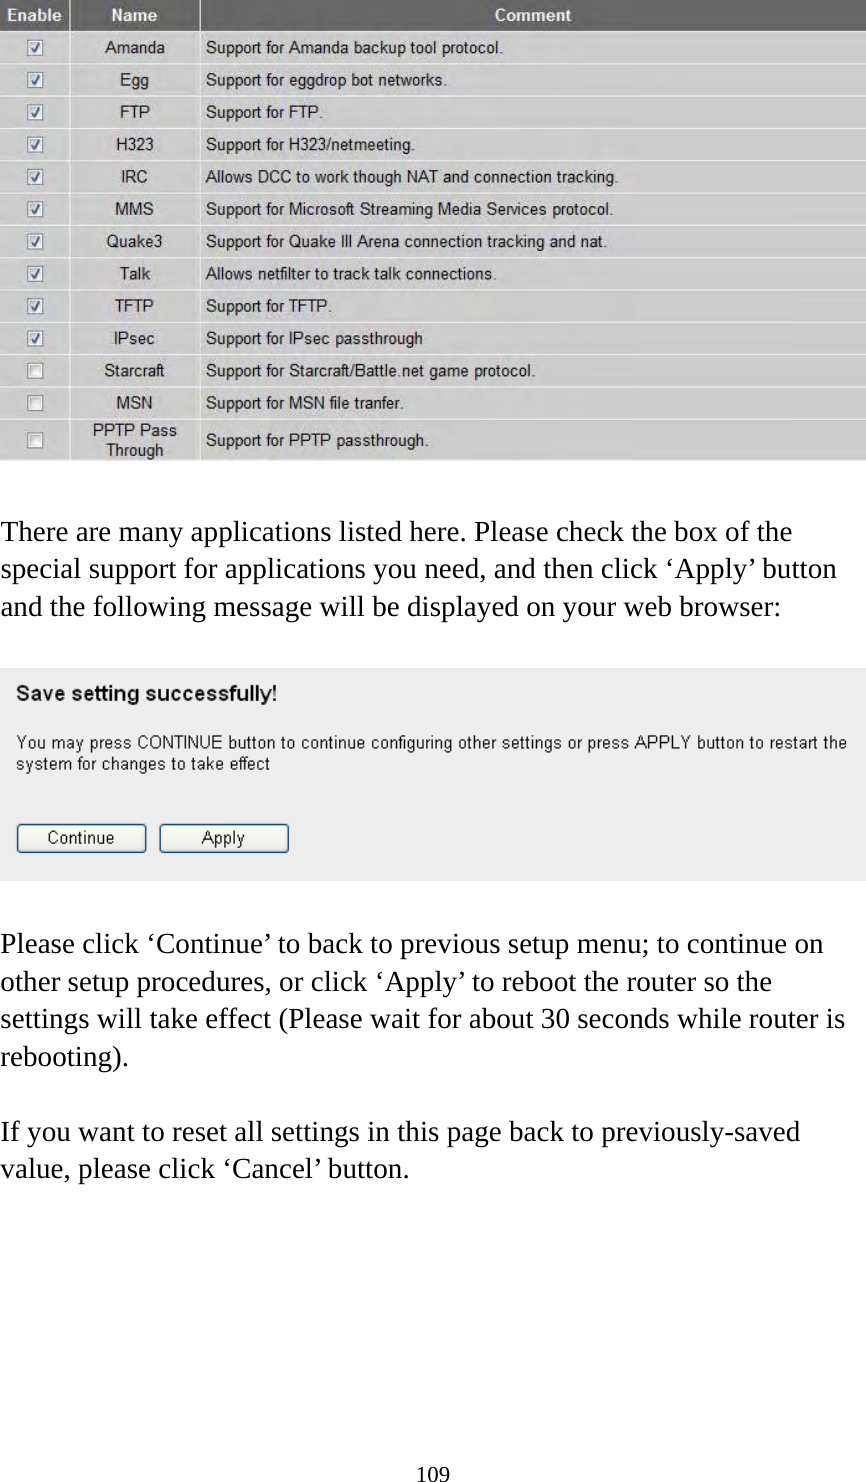 109   There are many applications listed here. Please check the box of the special support for applications you need, and then click ‘Apply’ button and the following message will be displayed on your web browser:    Please click ‘Continue’ to back to previous setup menu; to continue on other setup procedures, or click ‘Apply’ to reboot the router so the settings will take effect (Please wait for about 30 seconds while router is rebooting).  If you want to reset all settings in this page back to previously-saved value, please click ‘Cancel’ button.   